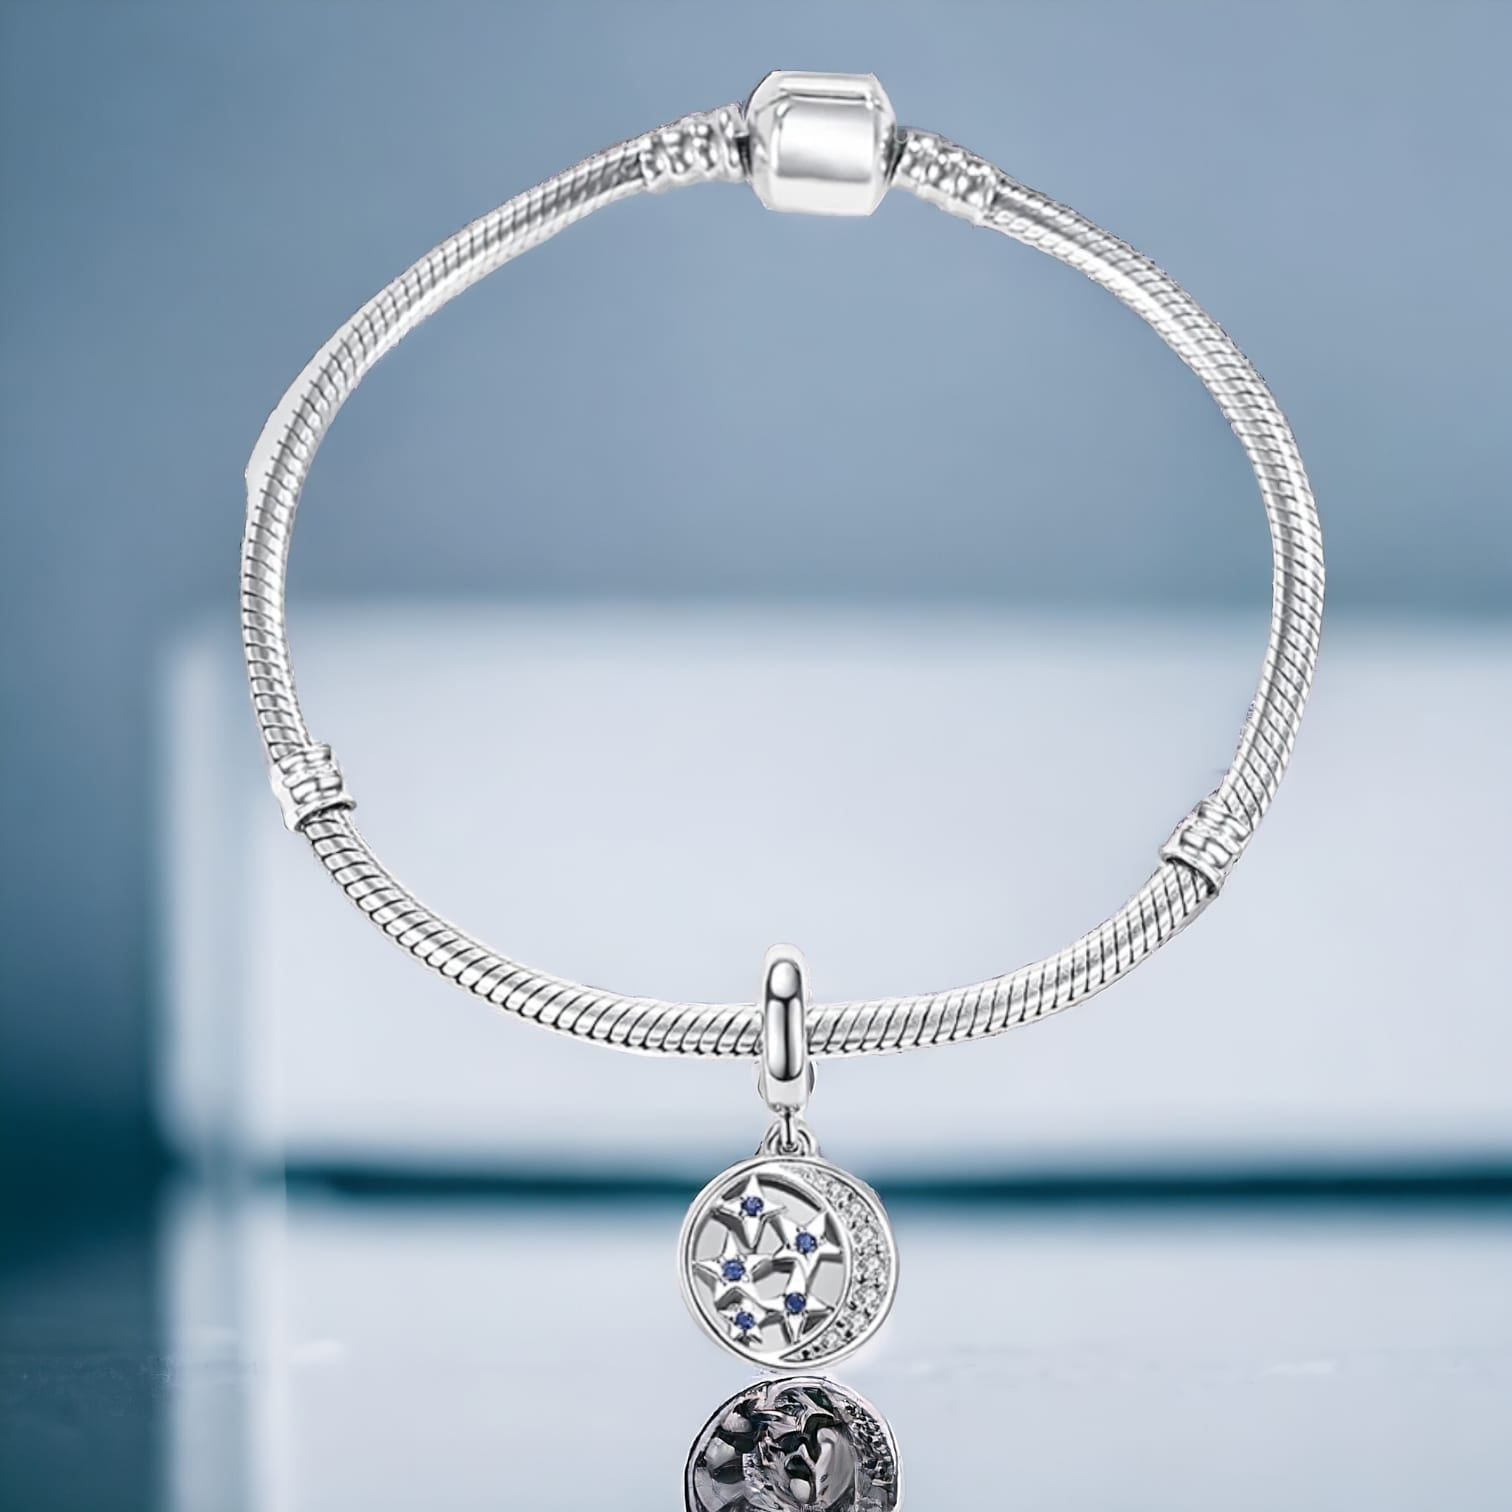 Moon and stars charm for Pandora style bracelet - 3 weeks special introductory price